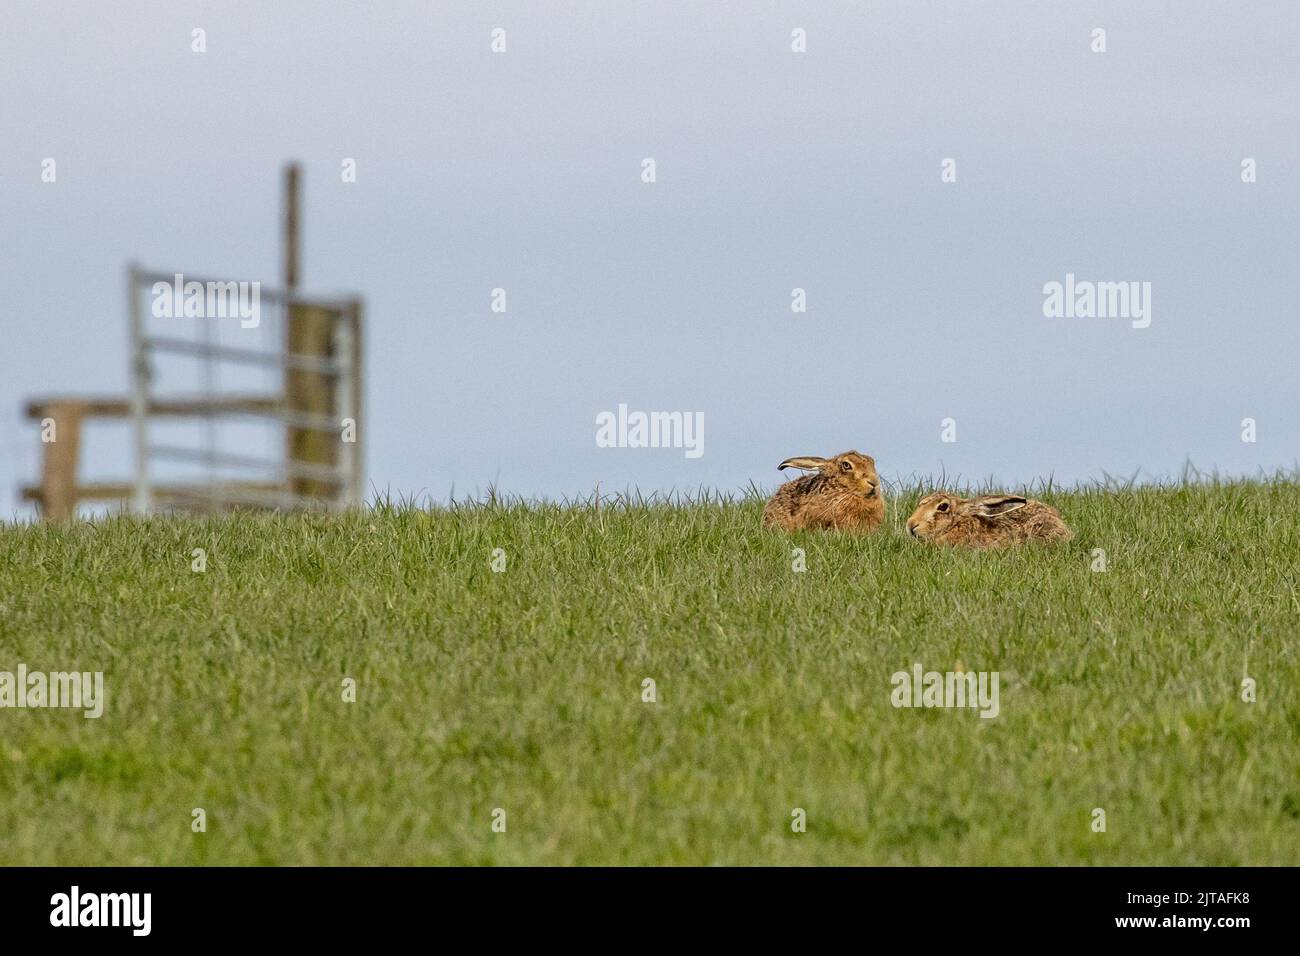 Two hares (Lepus europaeus) lying down in a farmer's field in grassland, Yorkshire, UK wildlife Stock Photo